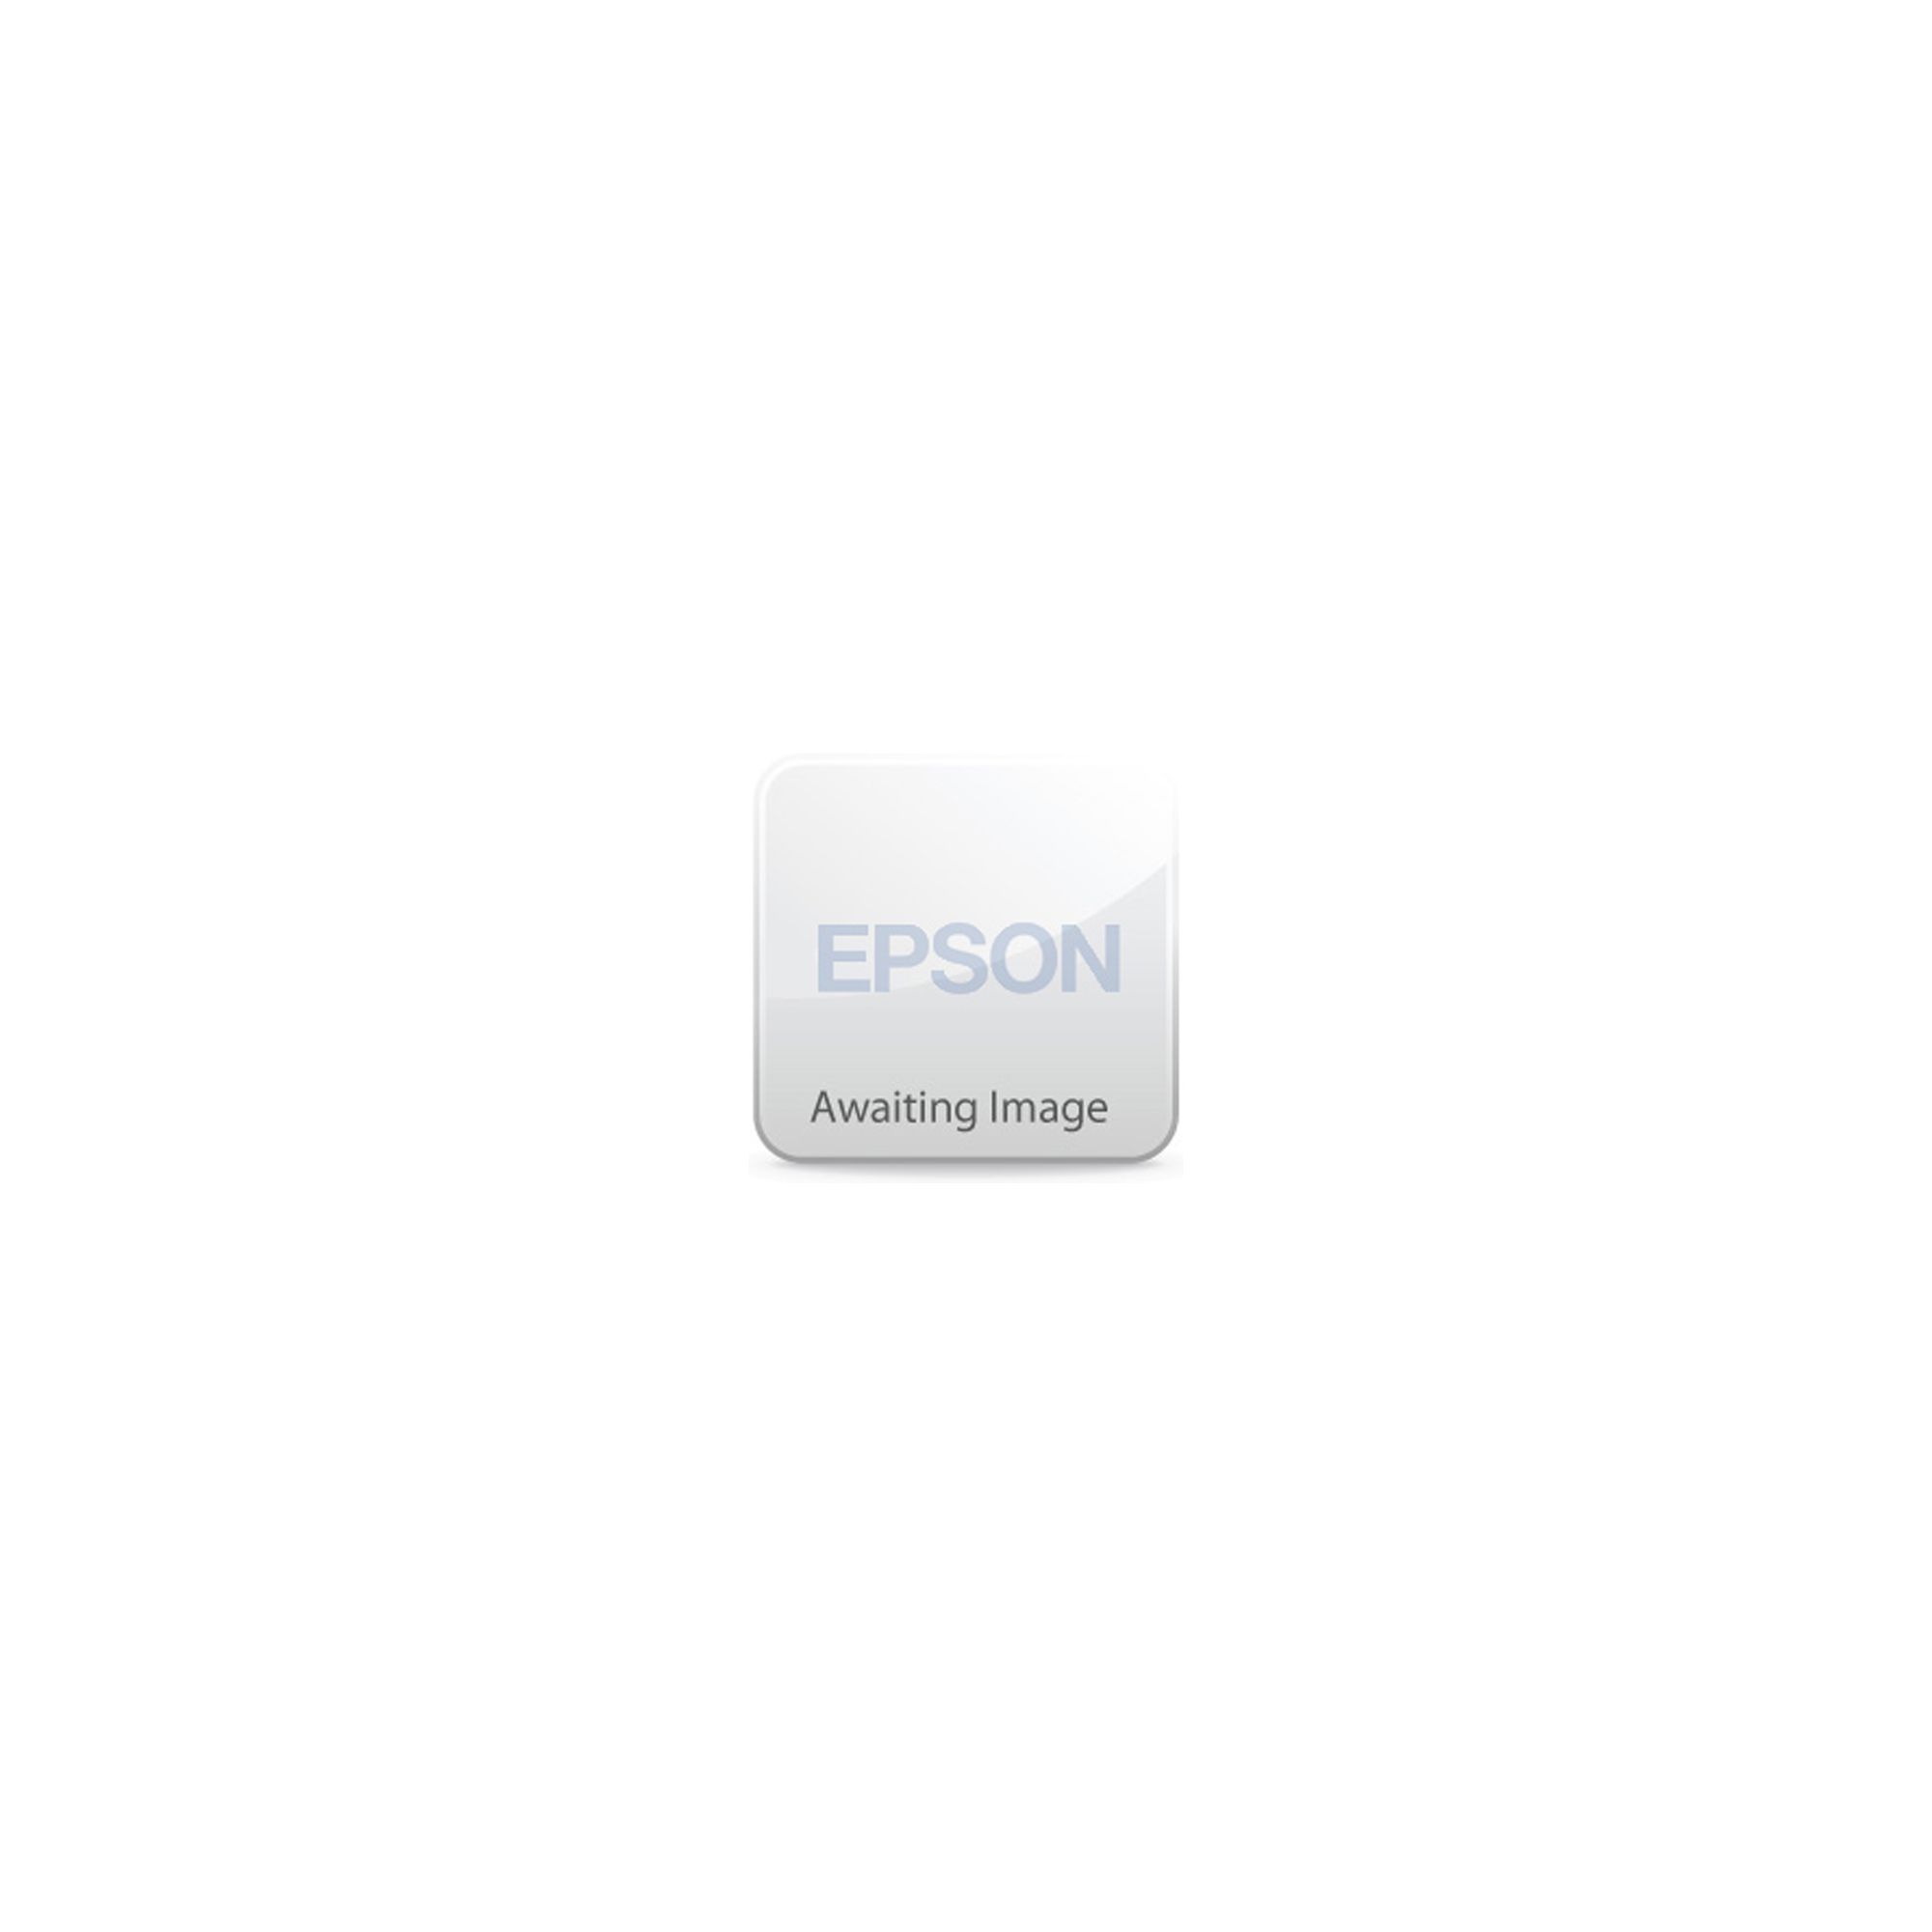 Epson V13H010L10 Replacement Projector Lamp (230W) for EMP-710 at Tescos Direct